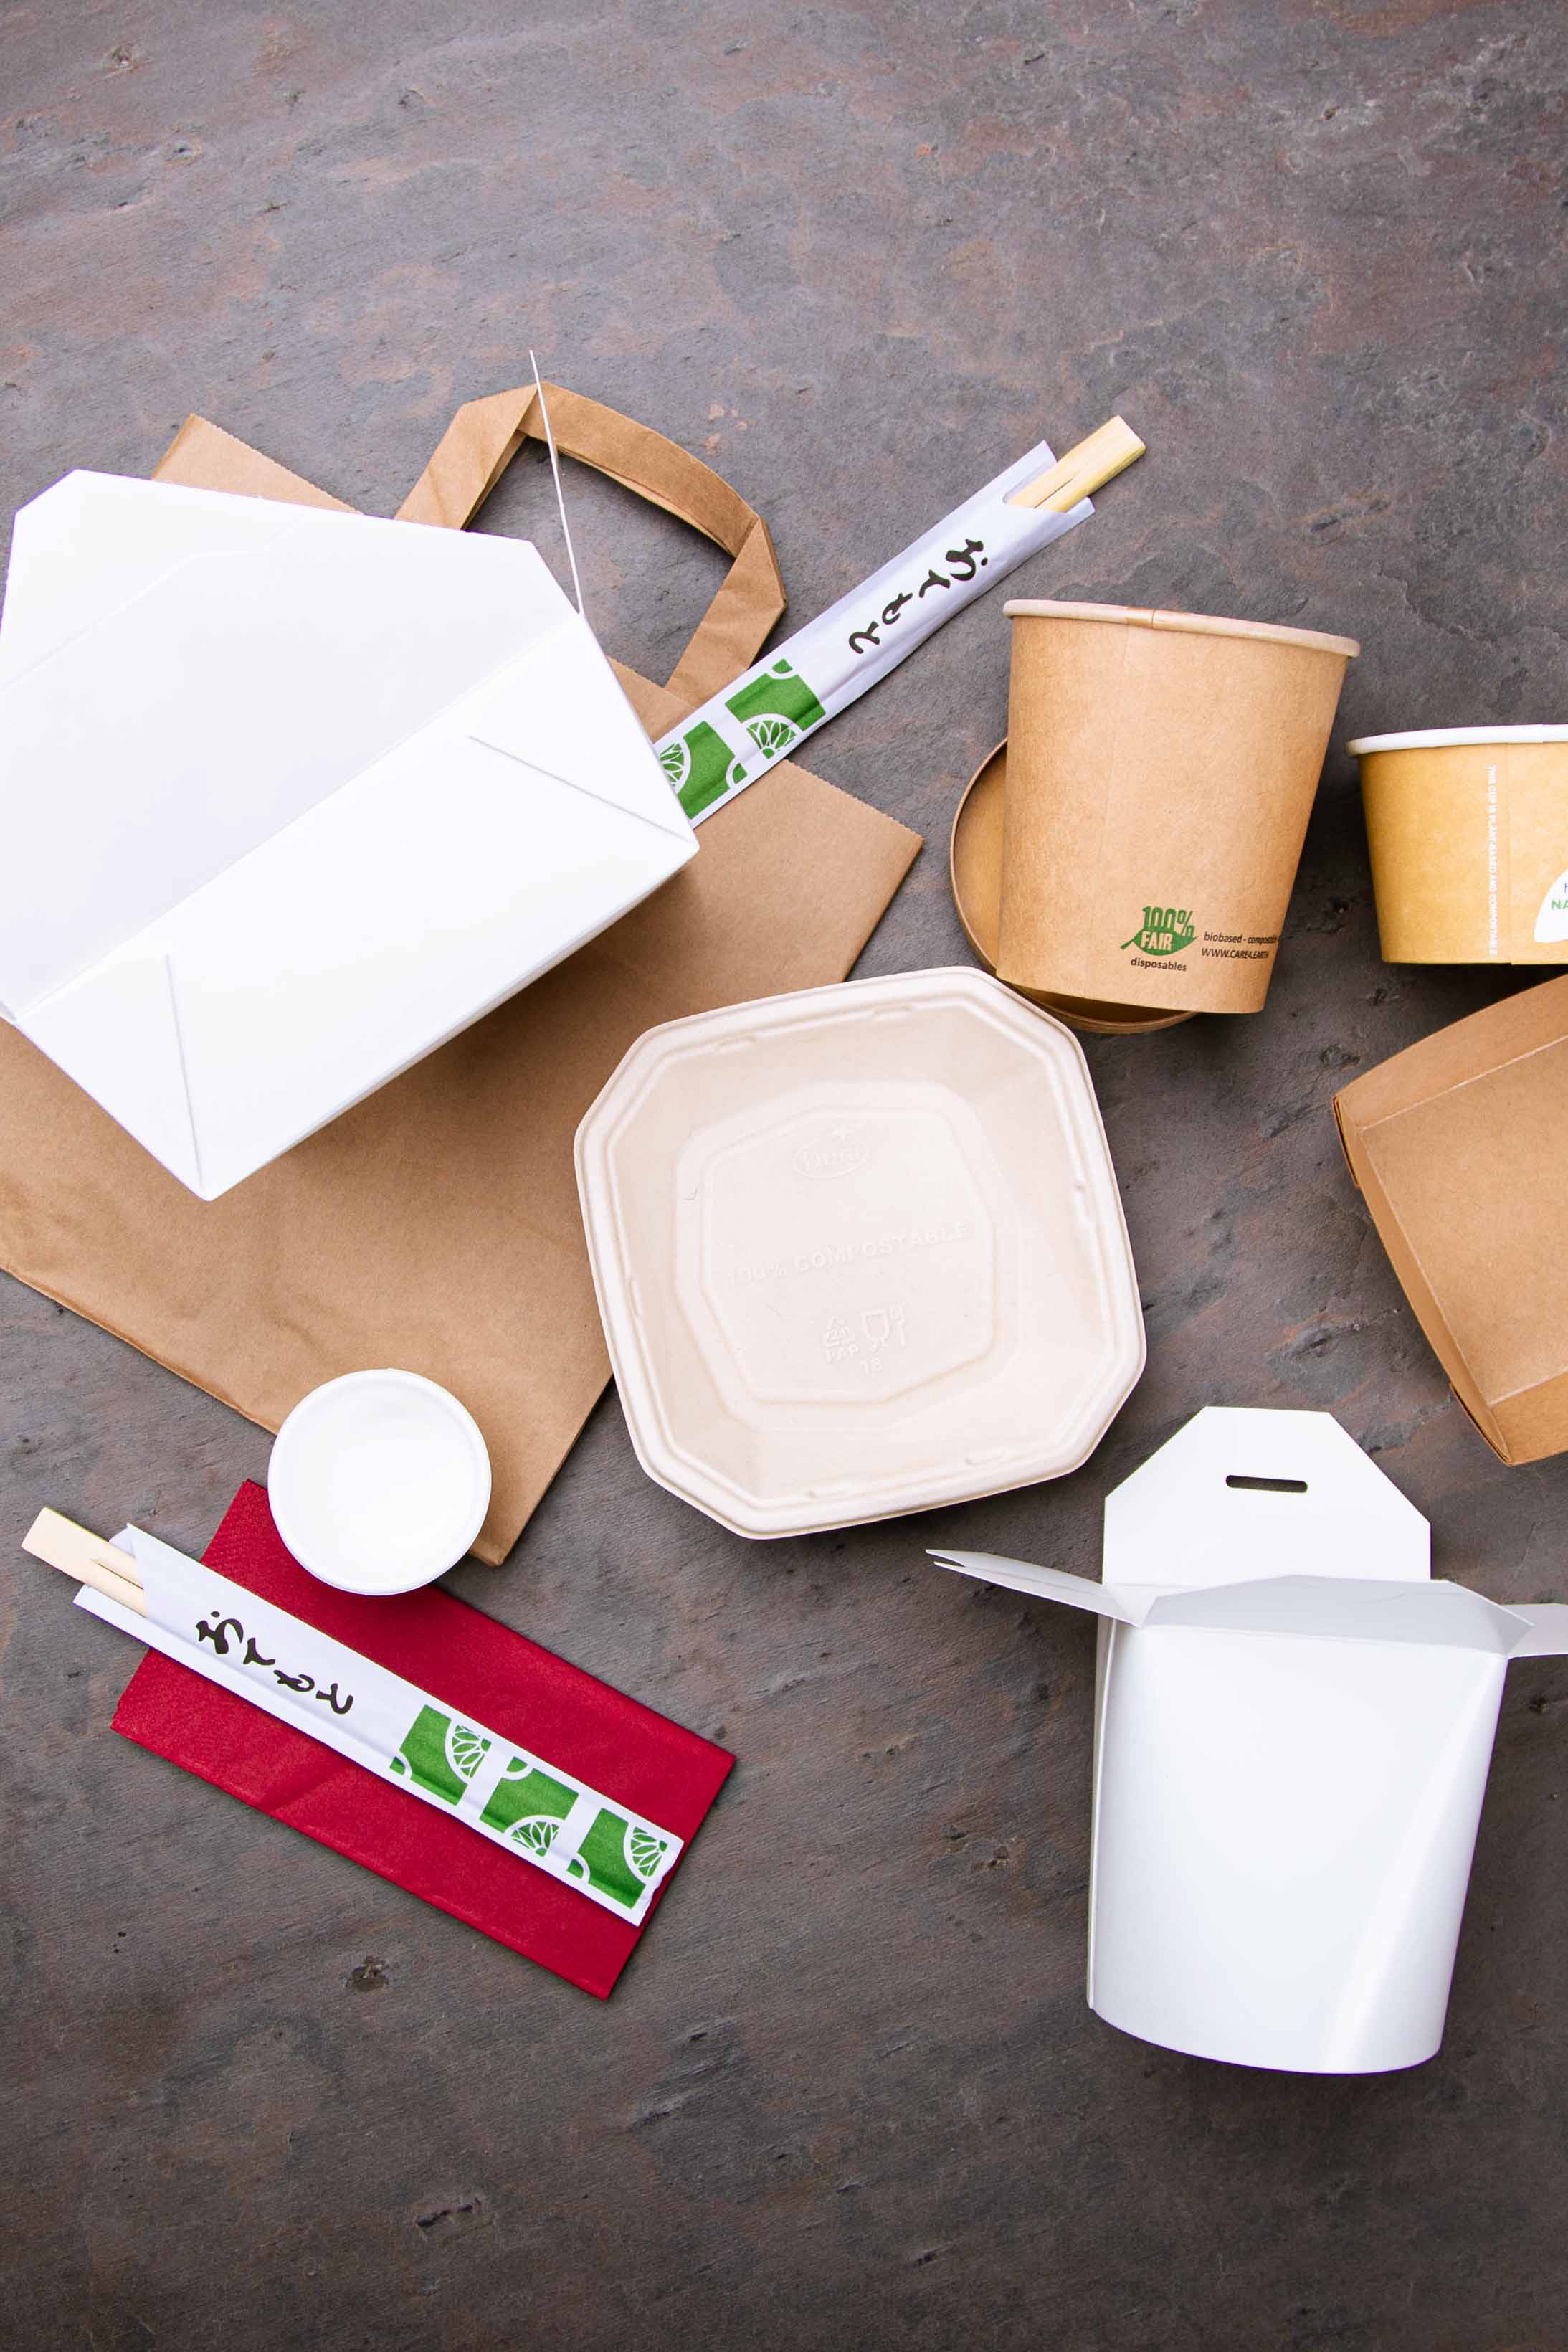 Different sustainable packaging from the restaurant.